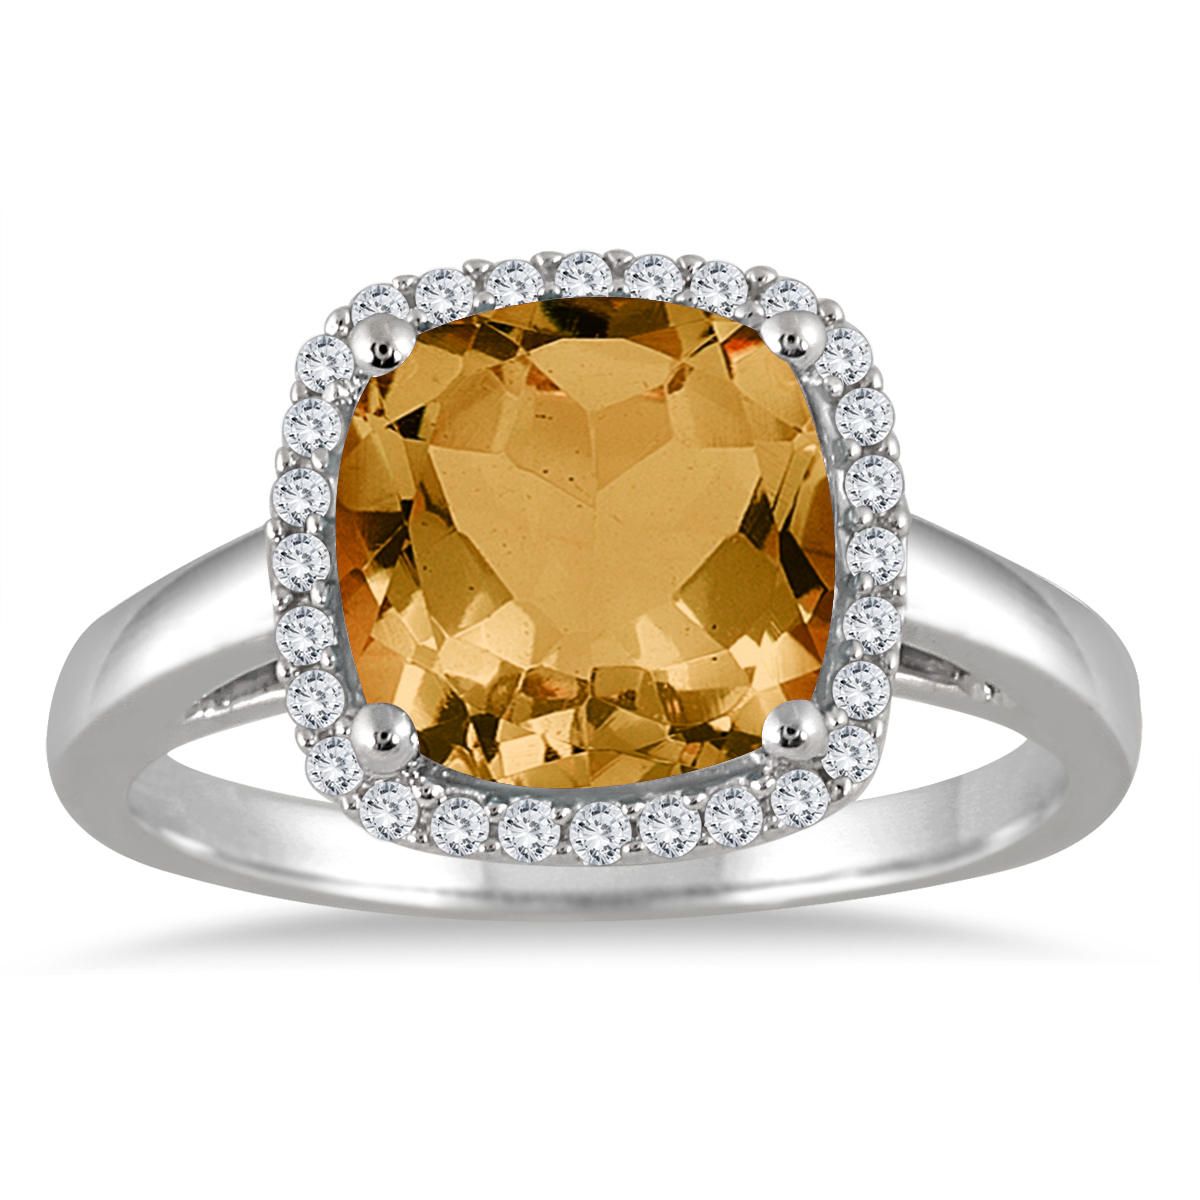 2.80 Carat Cushion Cut Citrine and Diamond Halo Ring in 10K White Gold